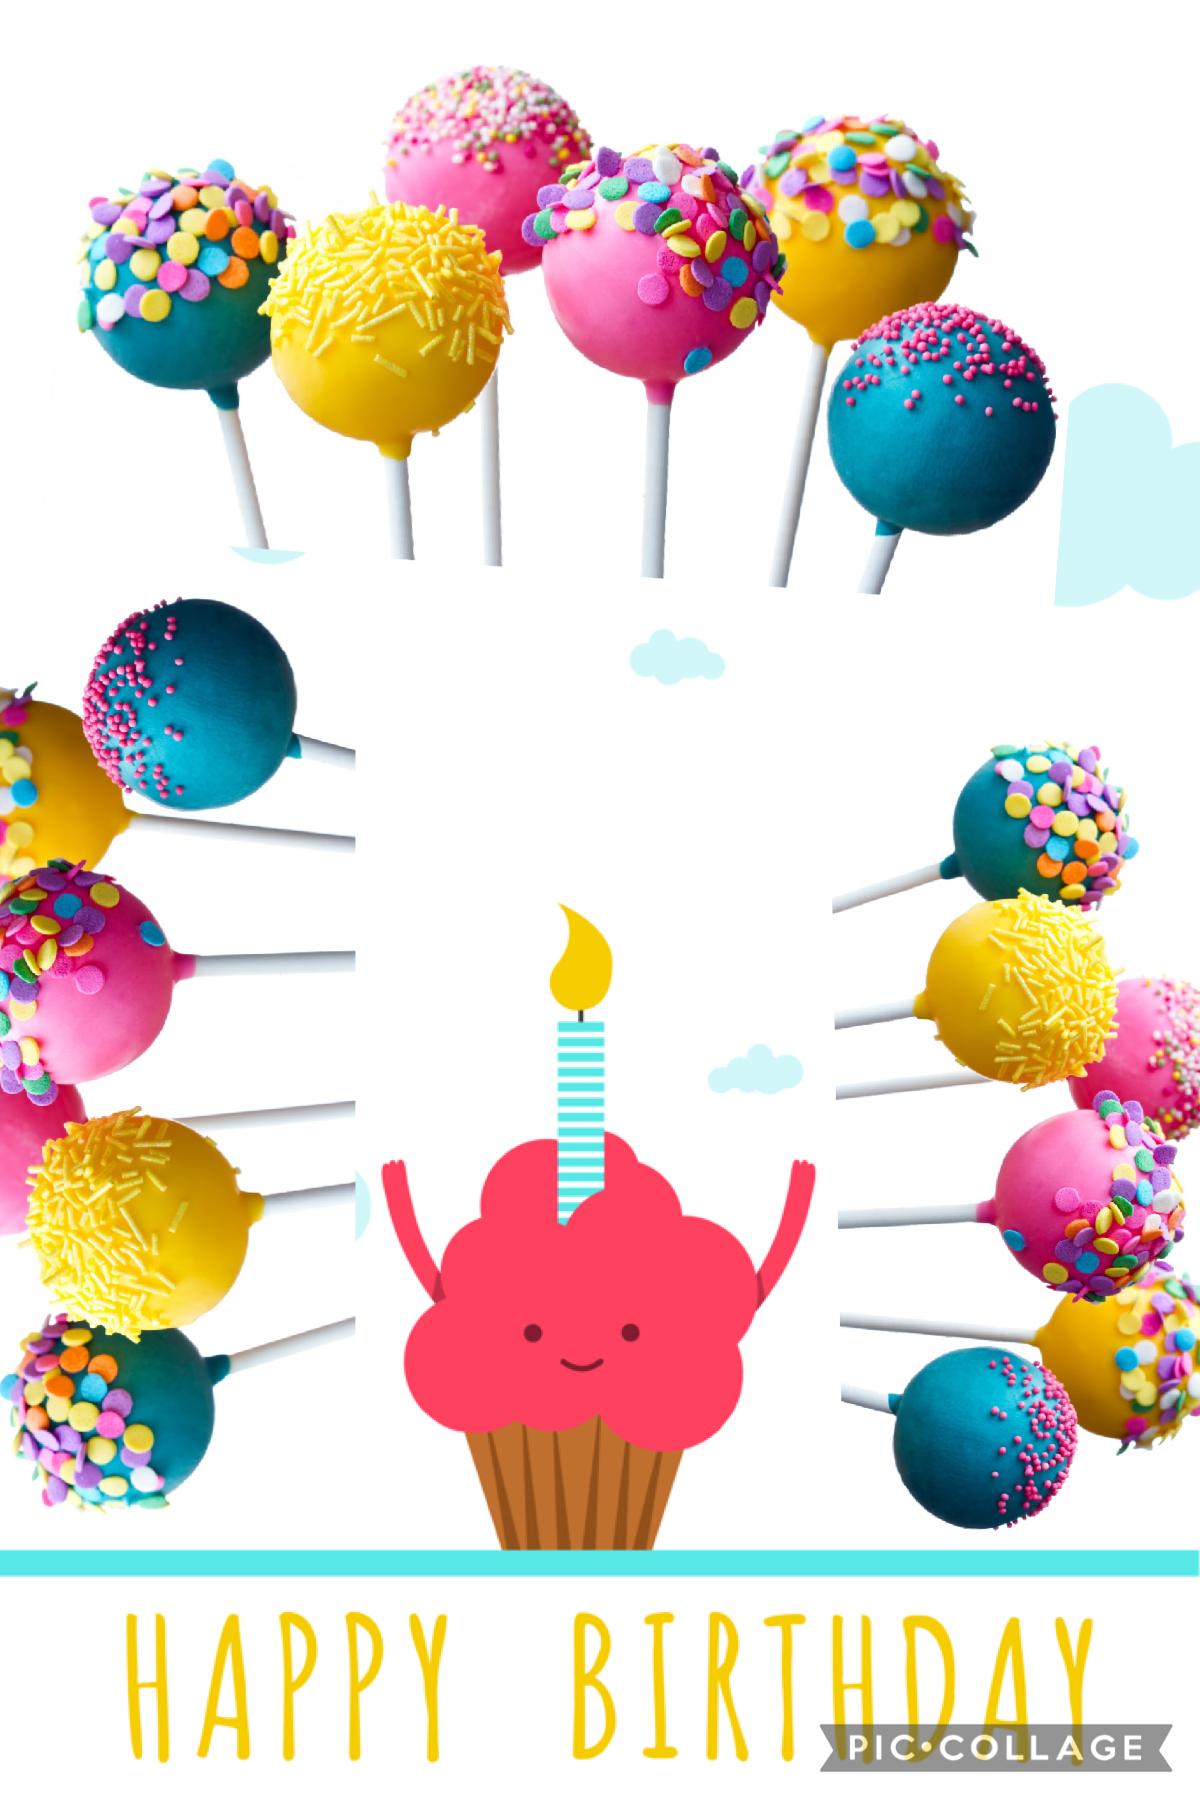 Birthday cards ONLINE for FRIENDS